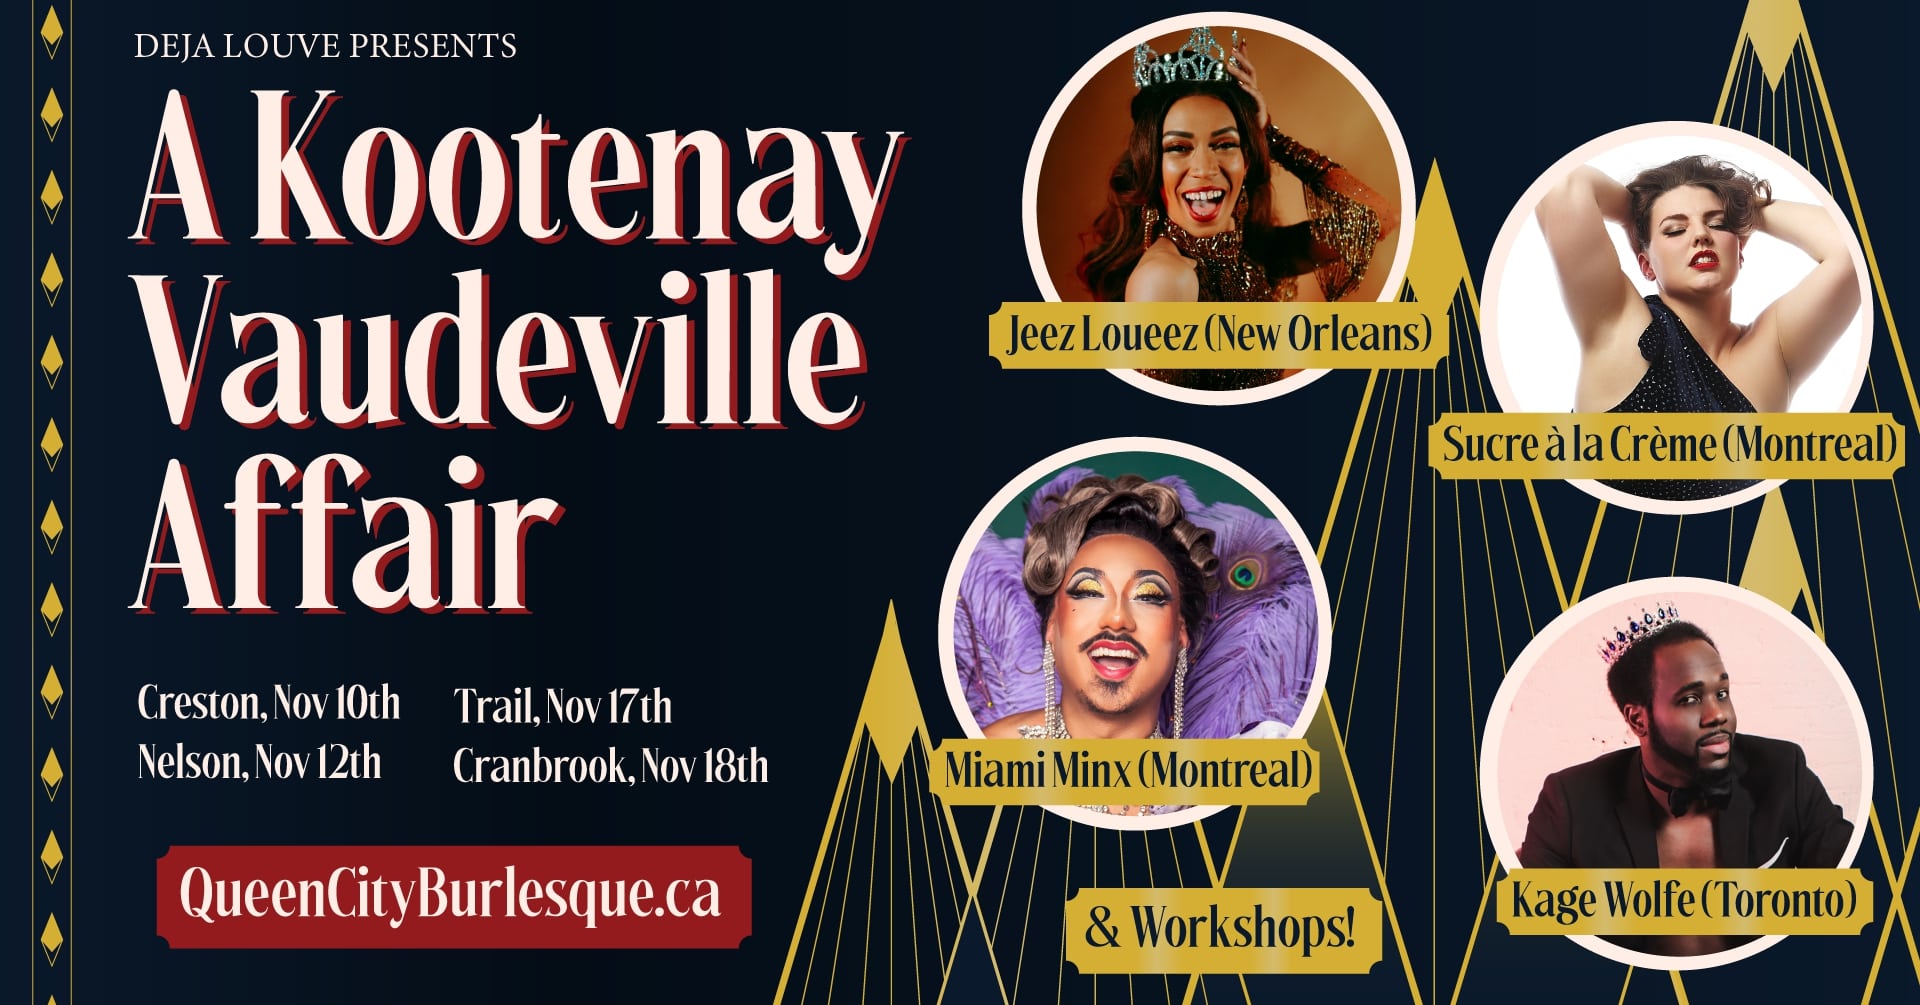 Award-winning burlesque performers from around North America provide an evening of fun and fantasy